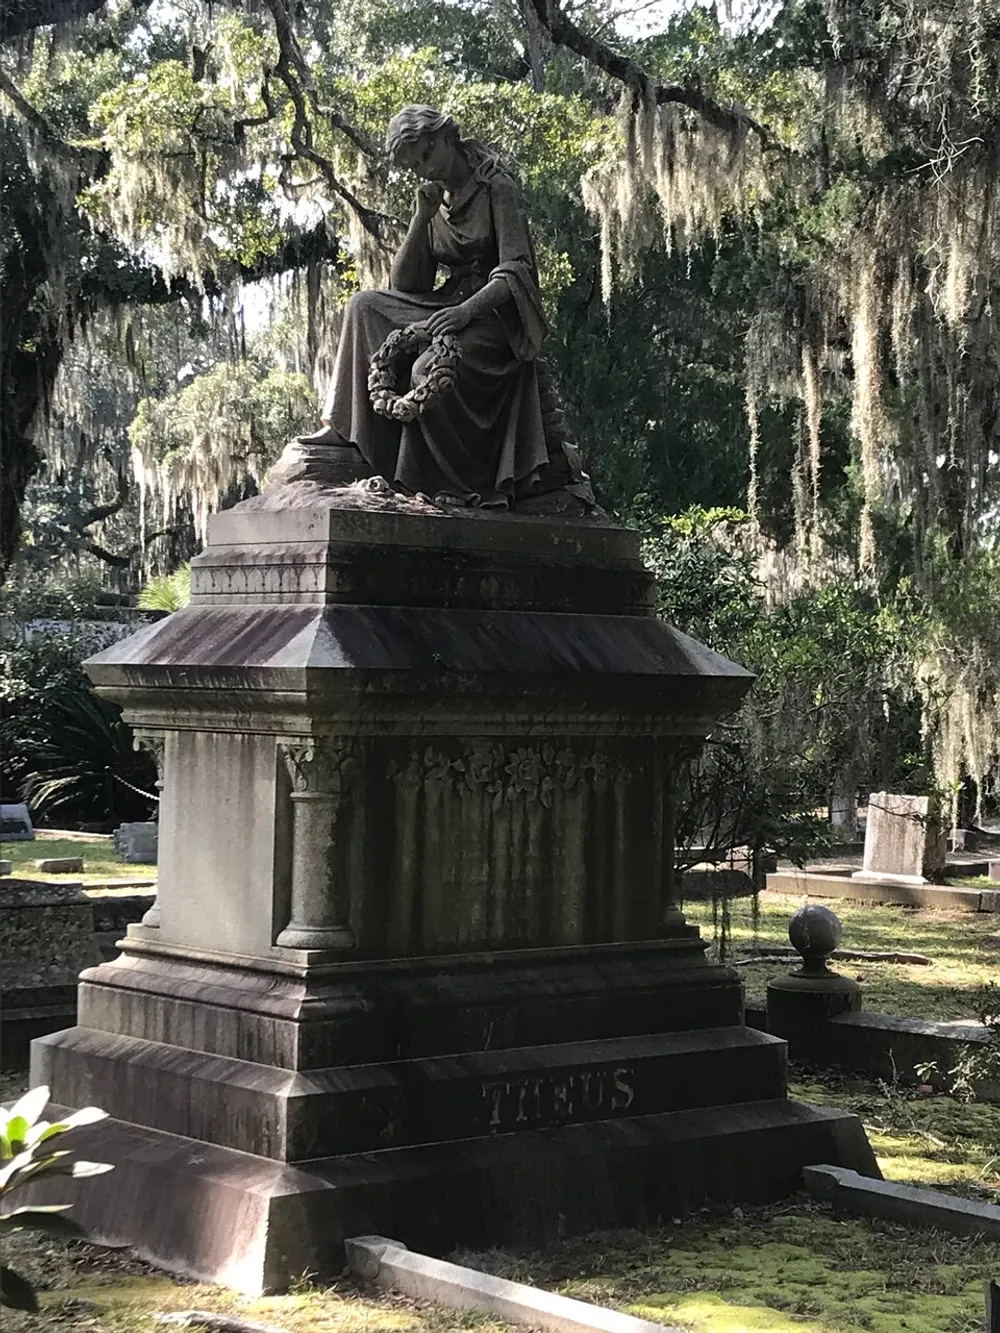 A solemn statue of a seated mourning figure holding a wreath atop a grave surrounded by Spanish moss-draped trees in a tranquil cemetery setting